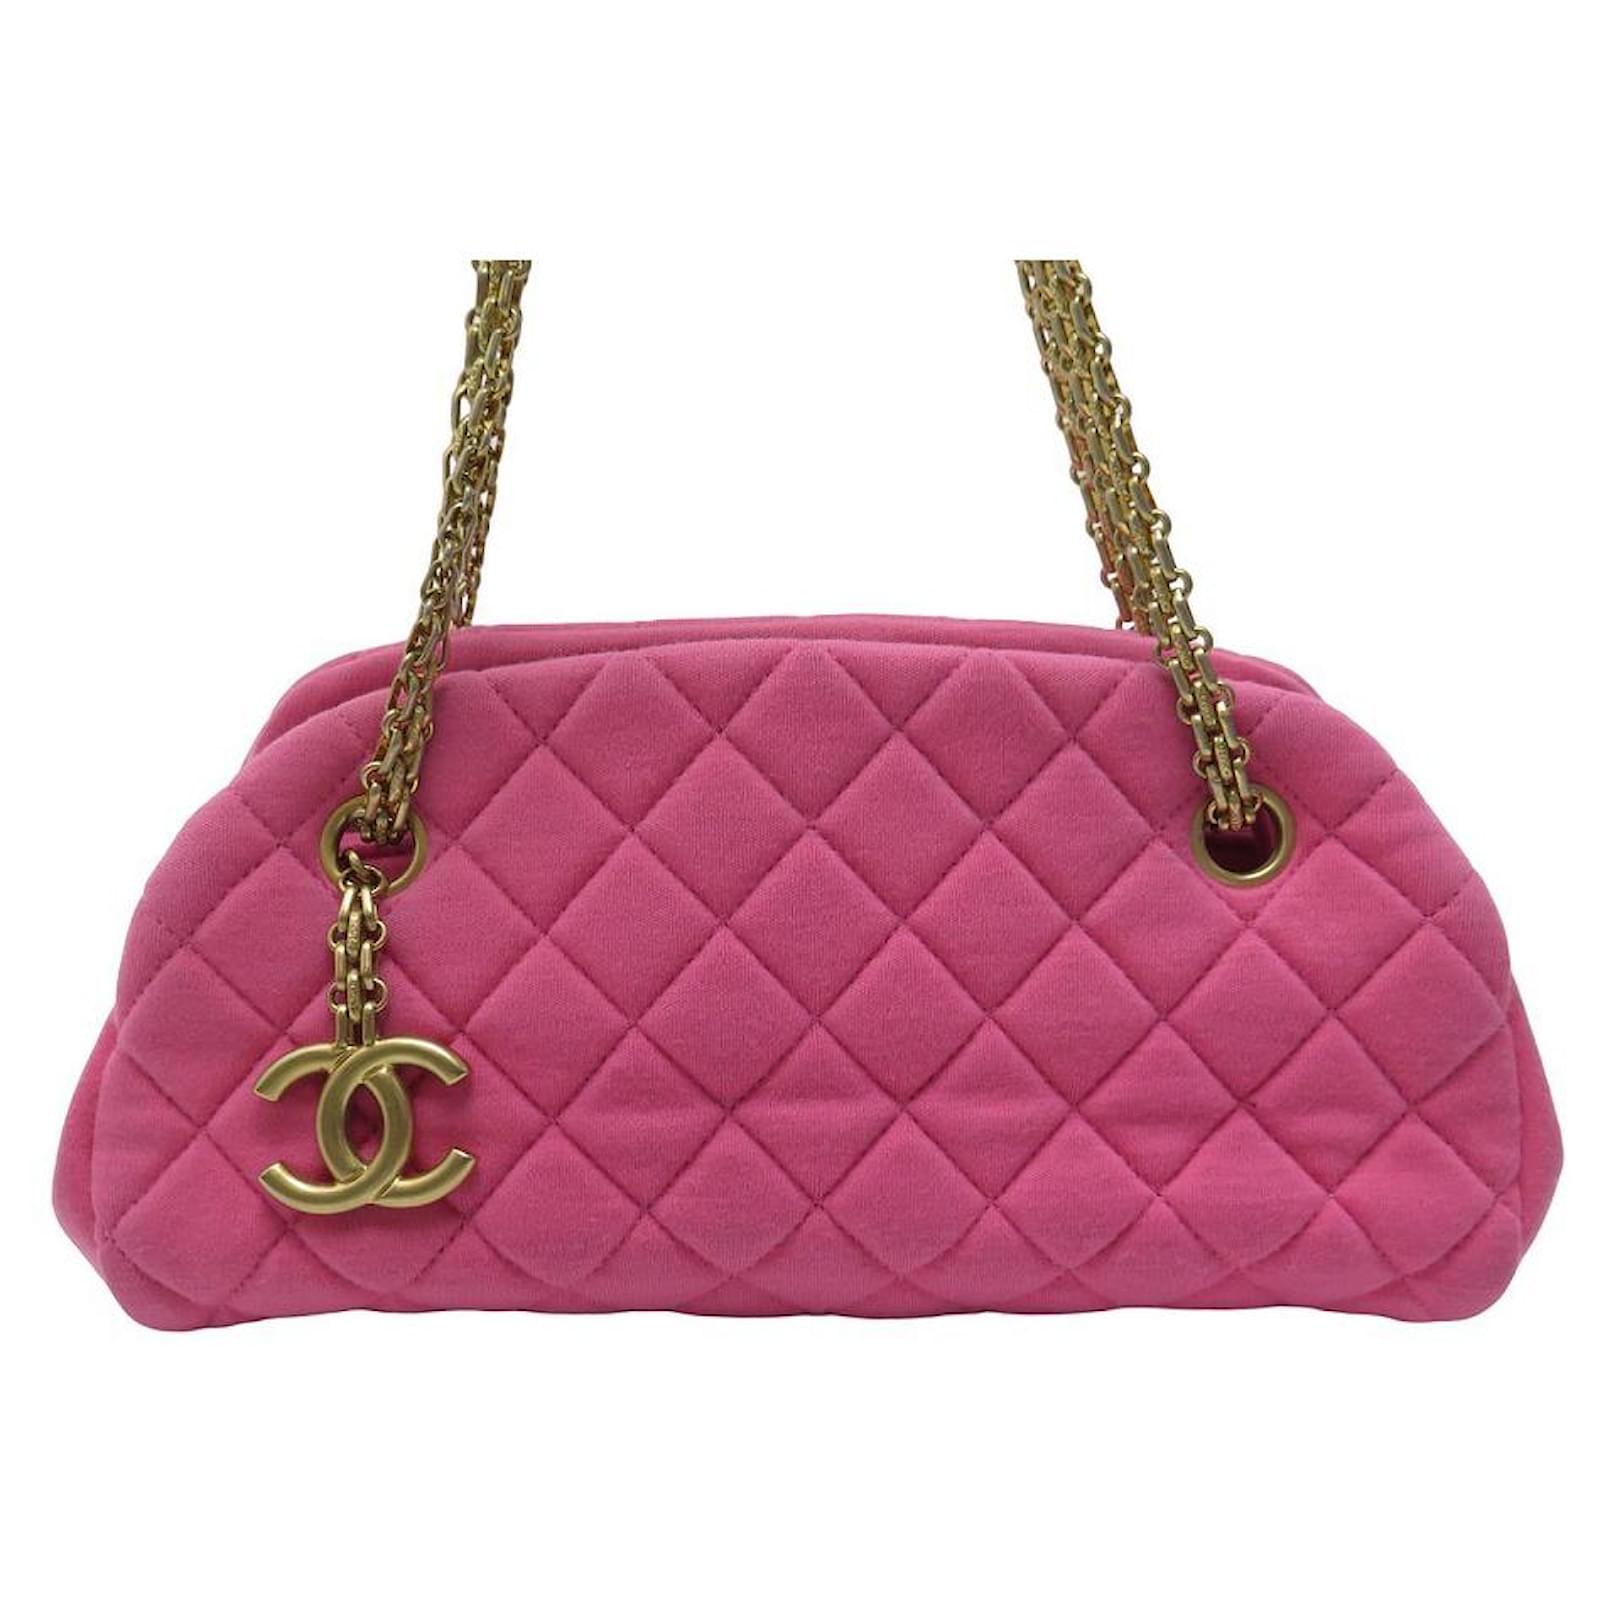 Vintage CHANEL Timeless Pink Quilted Caviar Bowler Bag